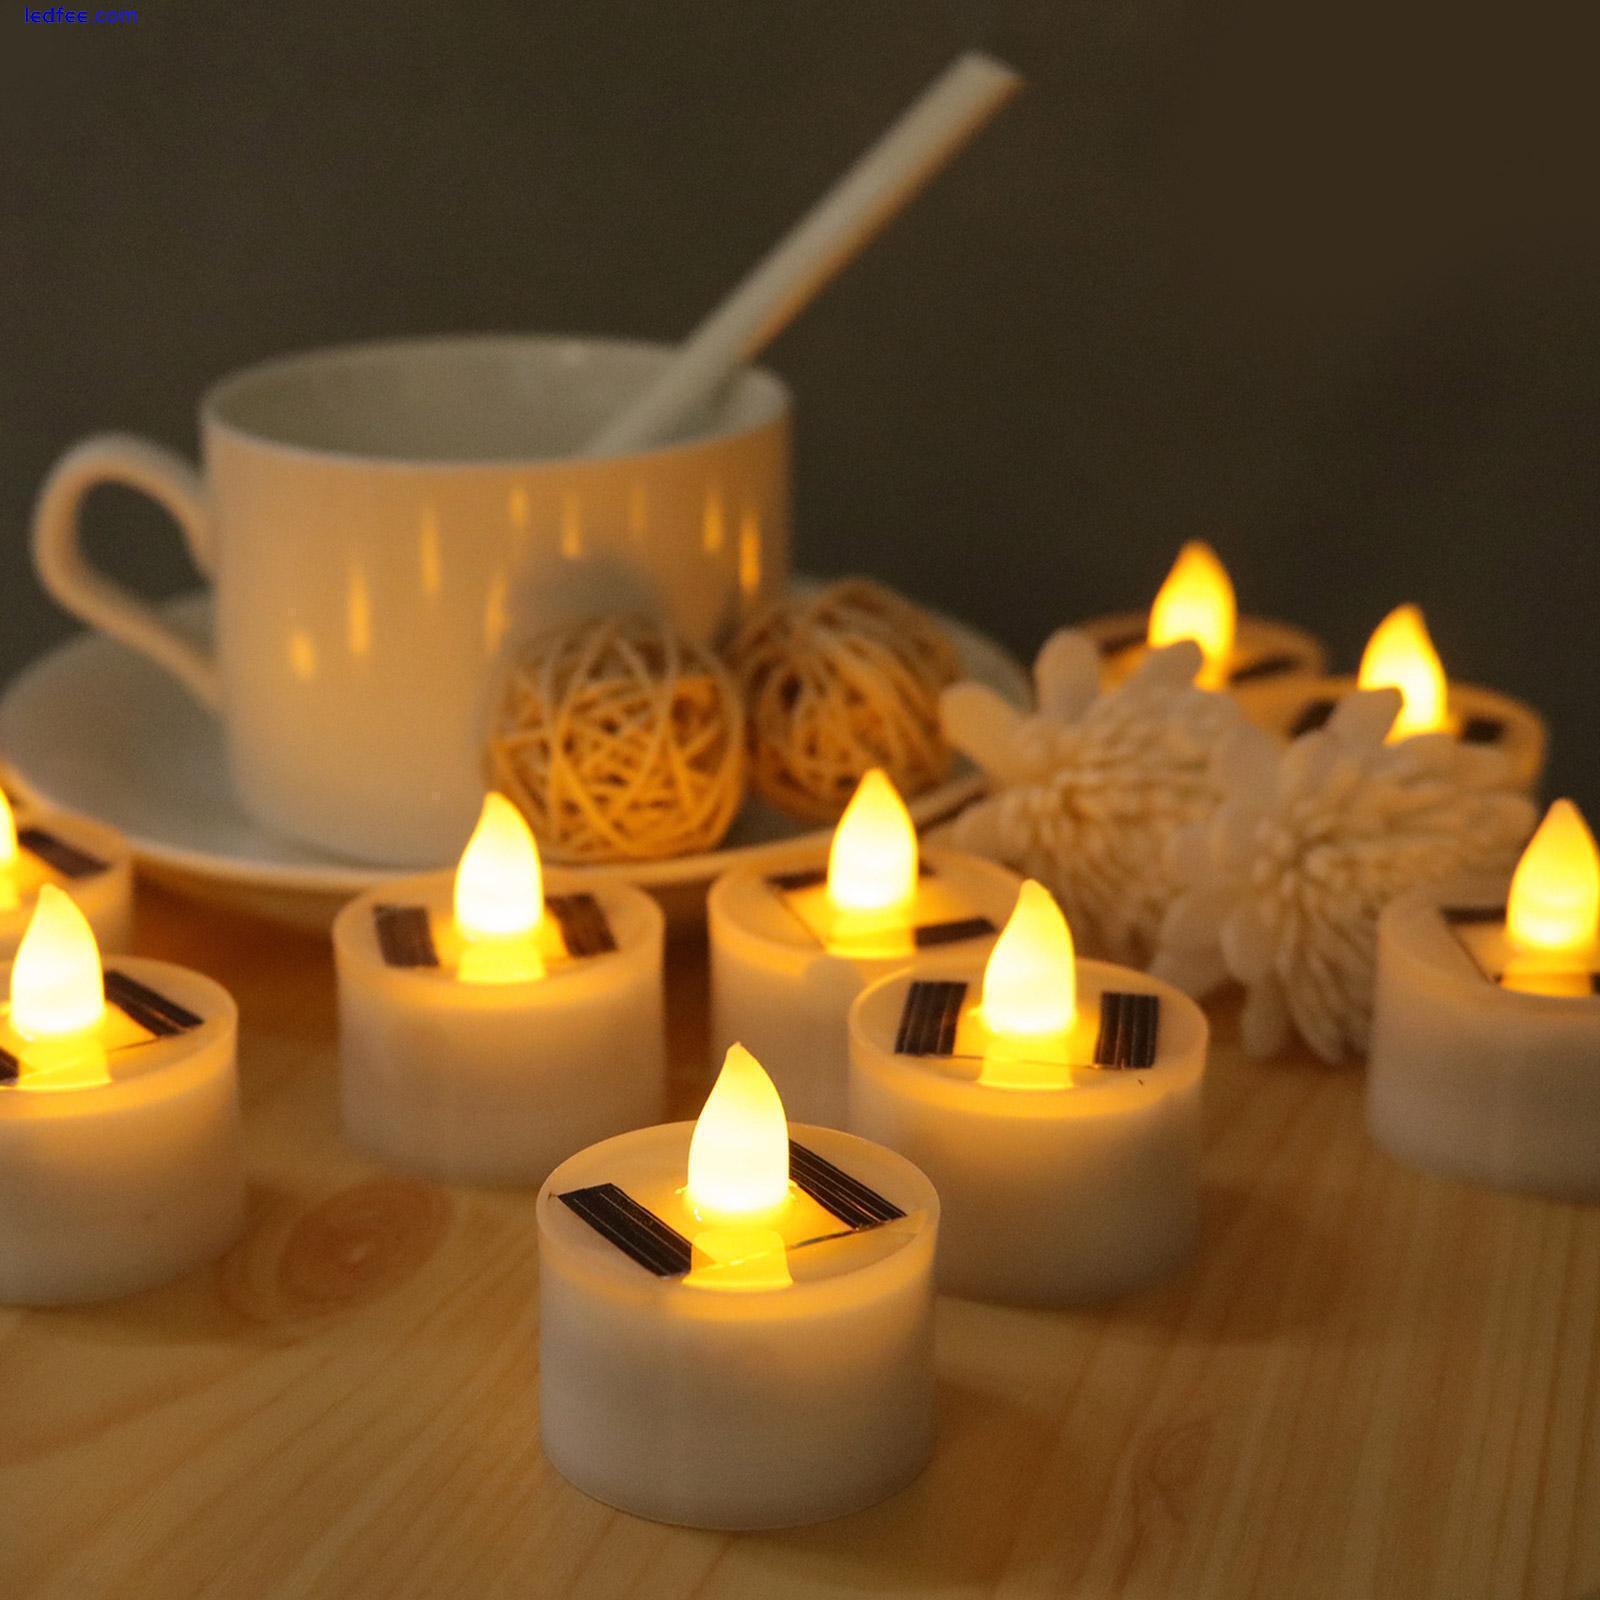 Solar LED Candle Light Smokeless Electronic Candle Birthday Halloween Party F1H2 4 